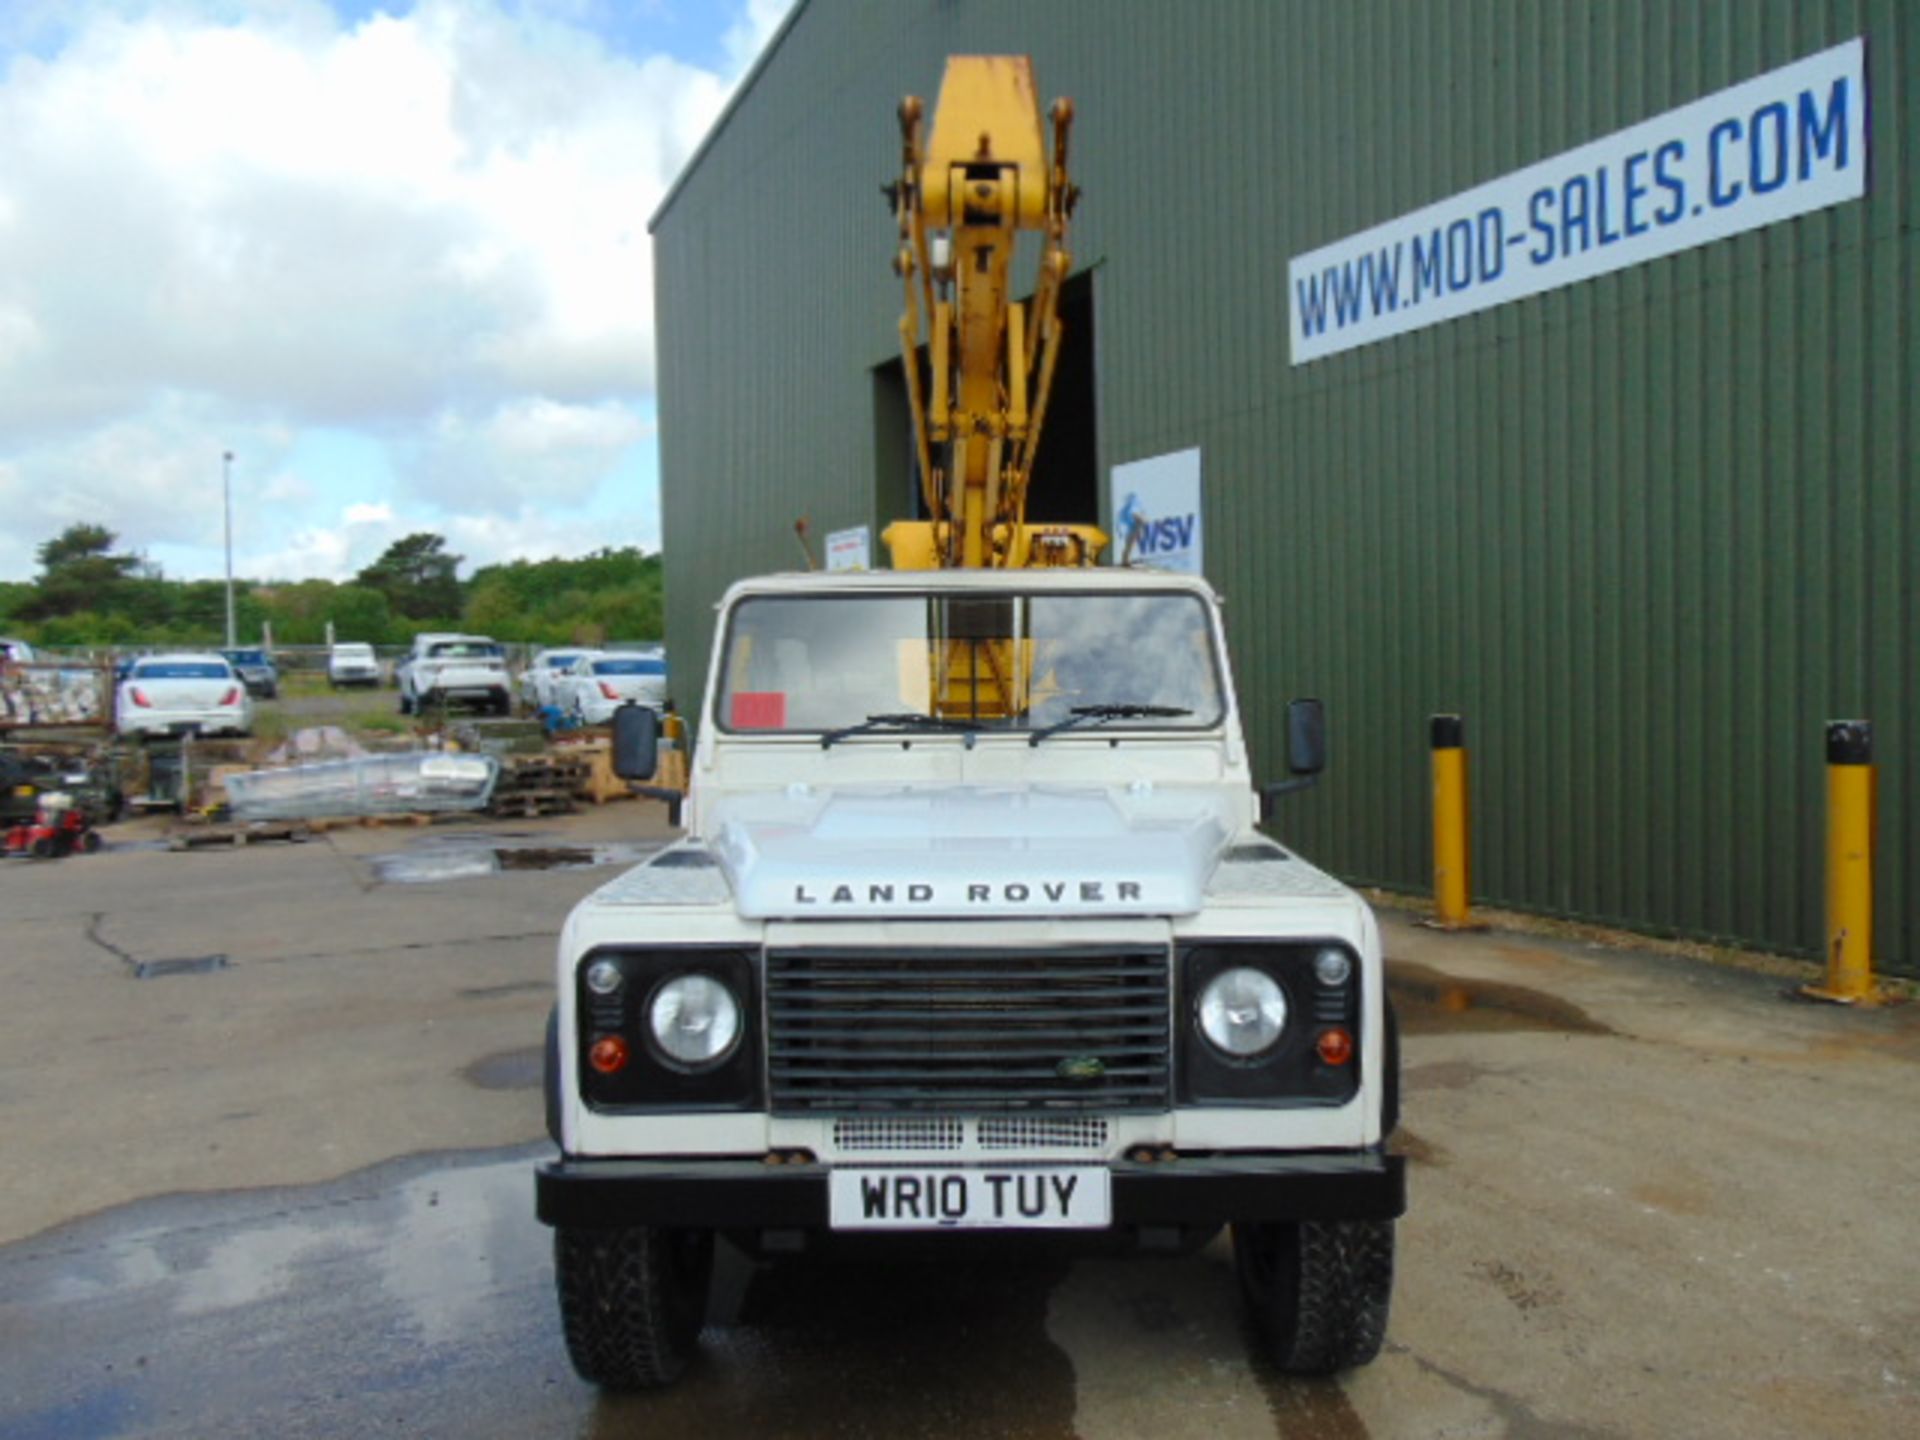 2010 Land Rover Defender 130 2.4 Puma Cherry Picker / Access Lift ONLY 83,760 MILES! - Image 5 of 32